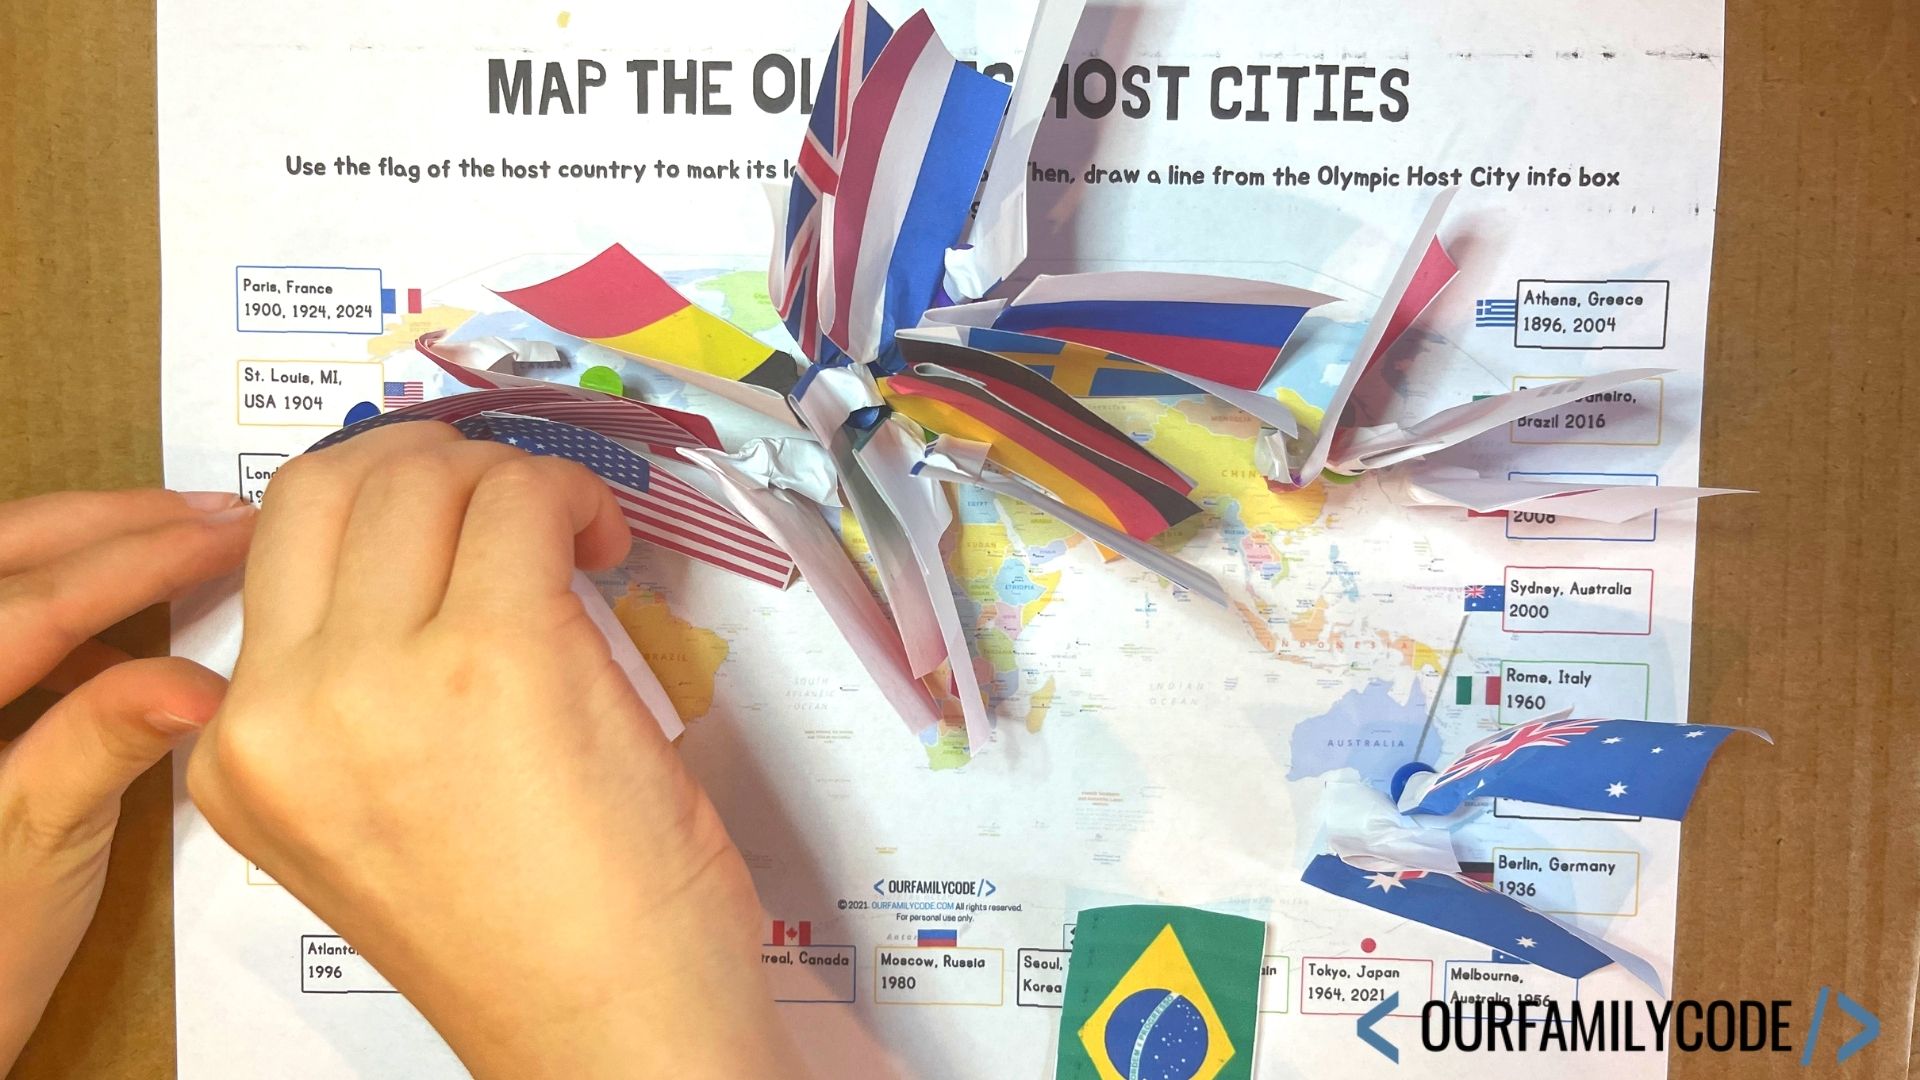 A picture of Olympic host cities on a printed map with cardboard underneath it and printed national flags made into map markers.